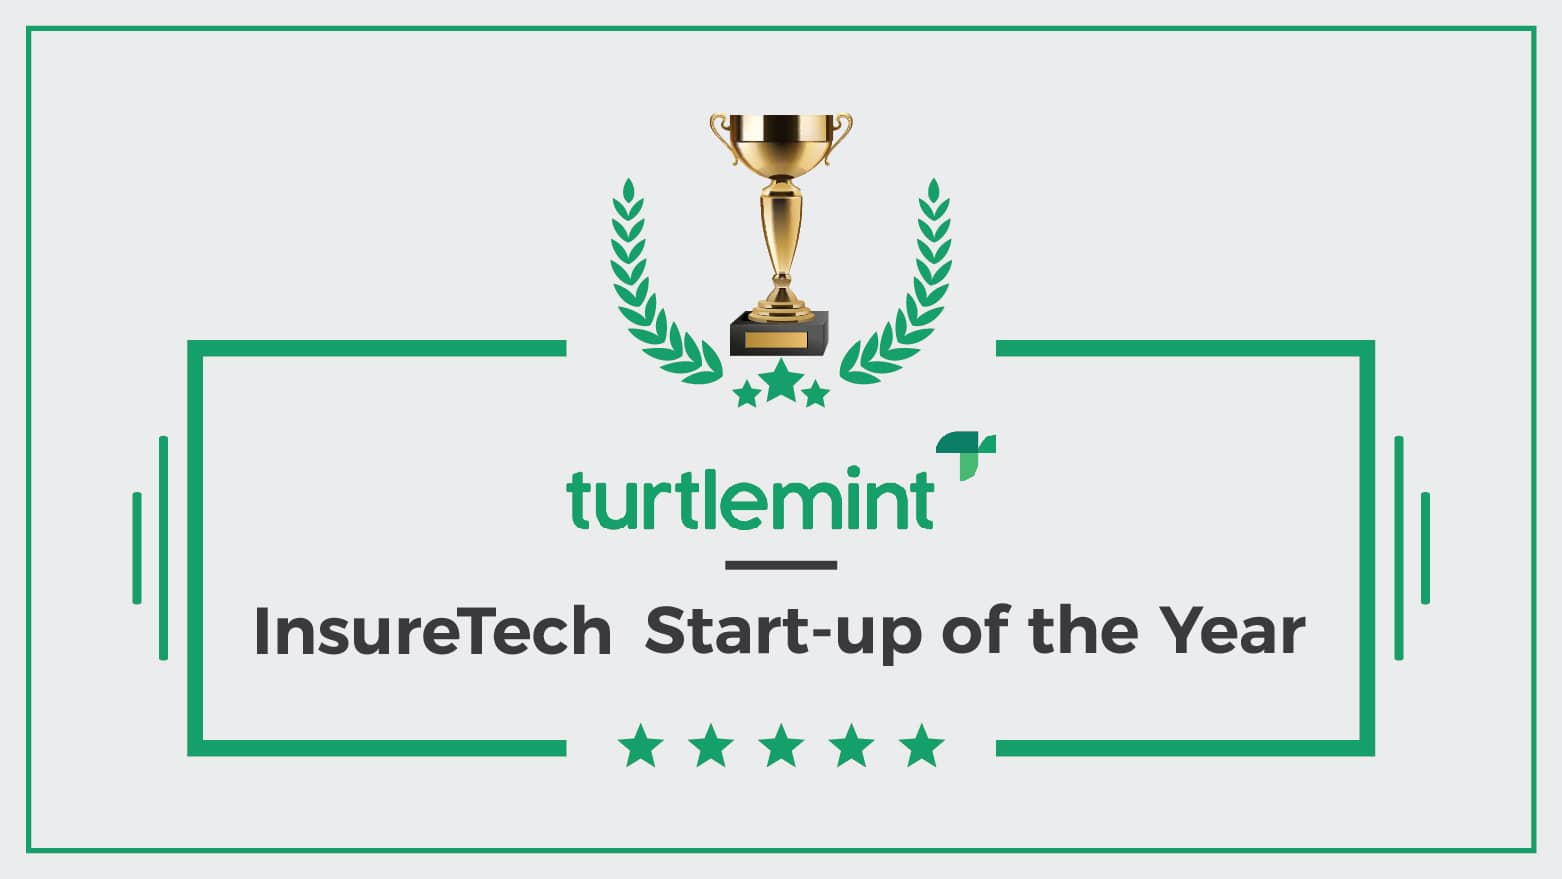 Turtlemint wins the “Insuretech Start-Up of the Year Award” hosted by Entrepreneur India